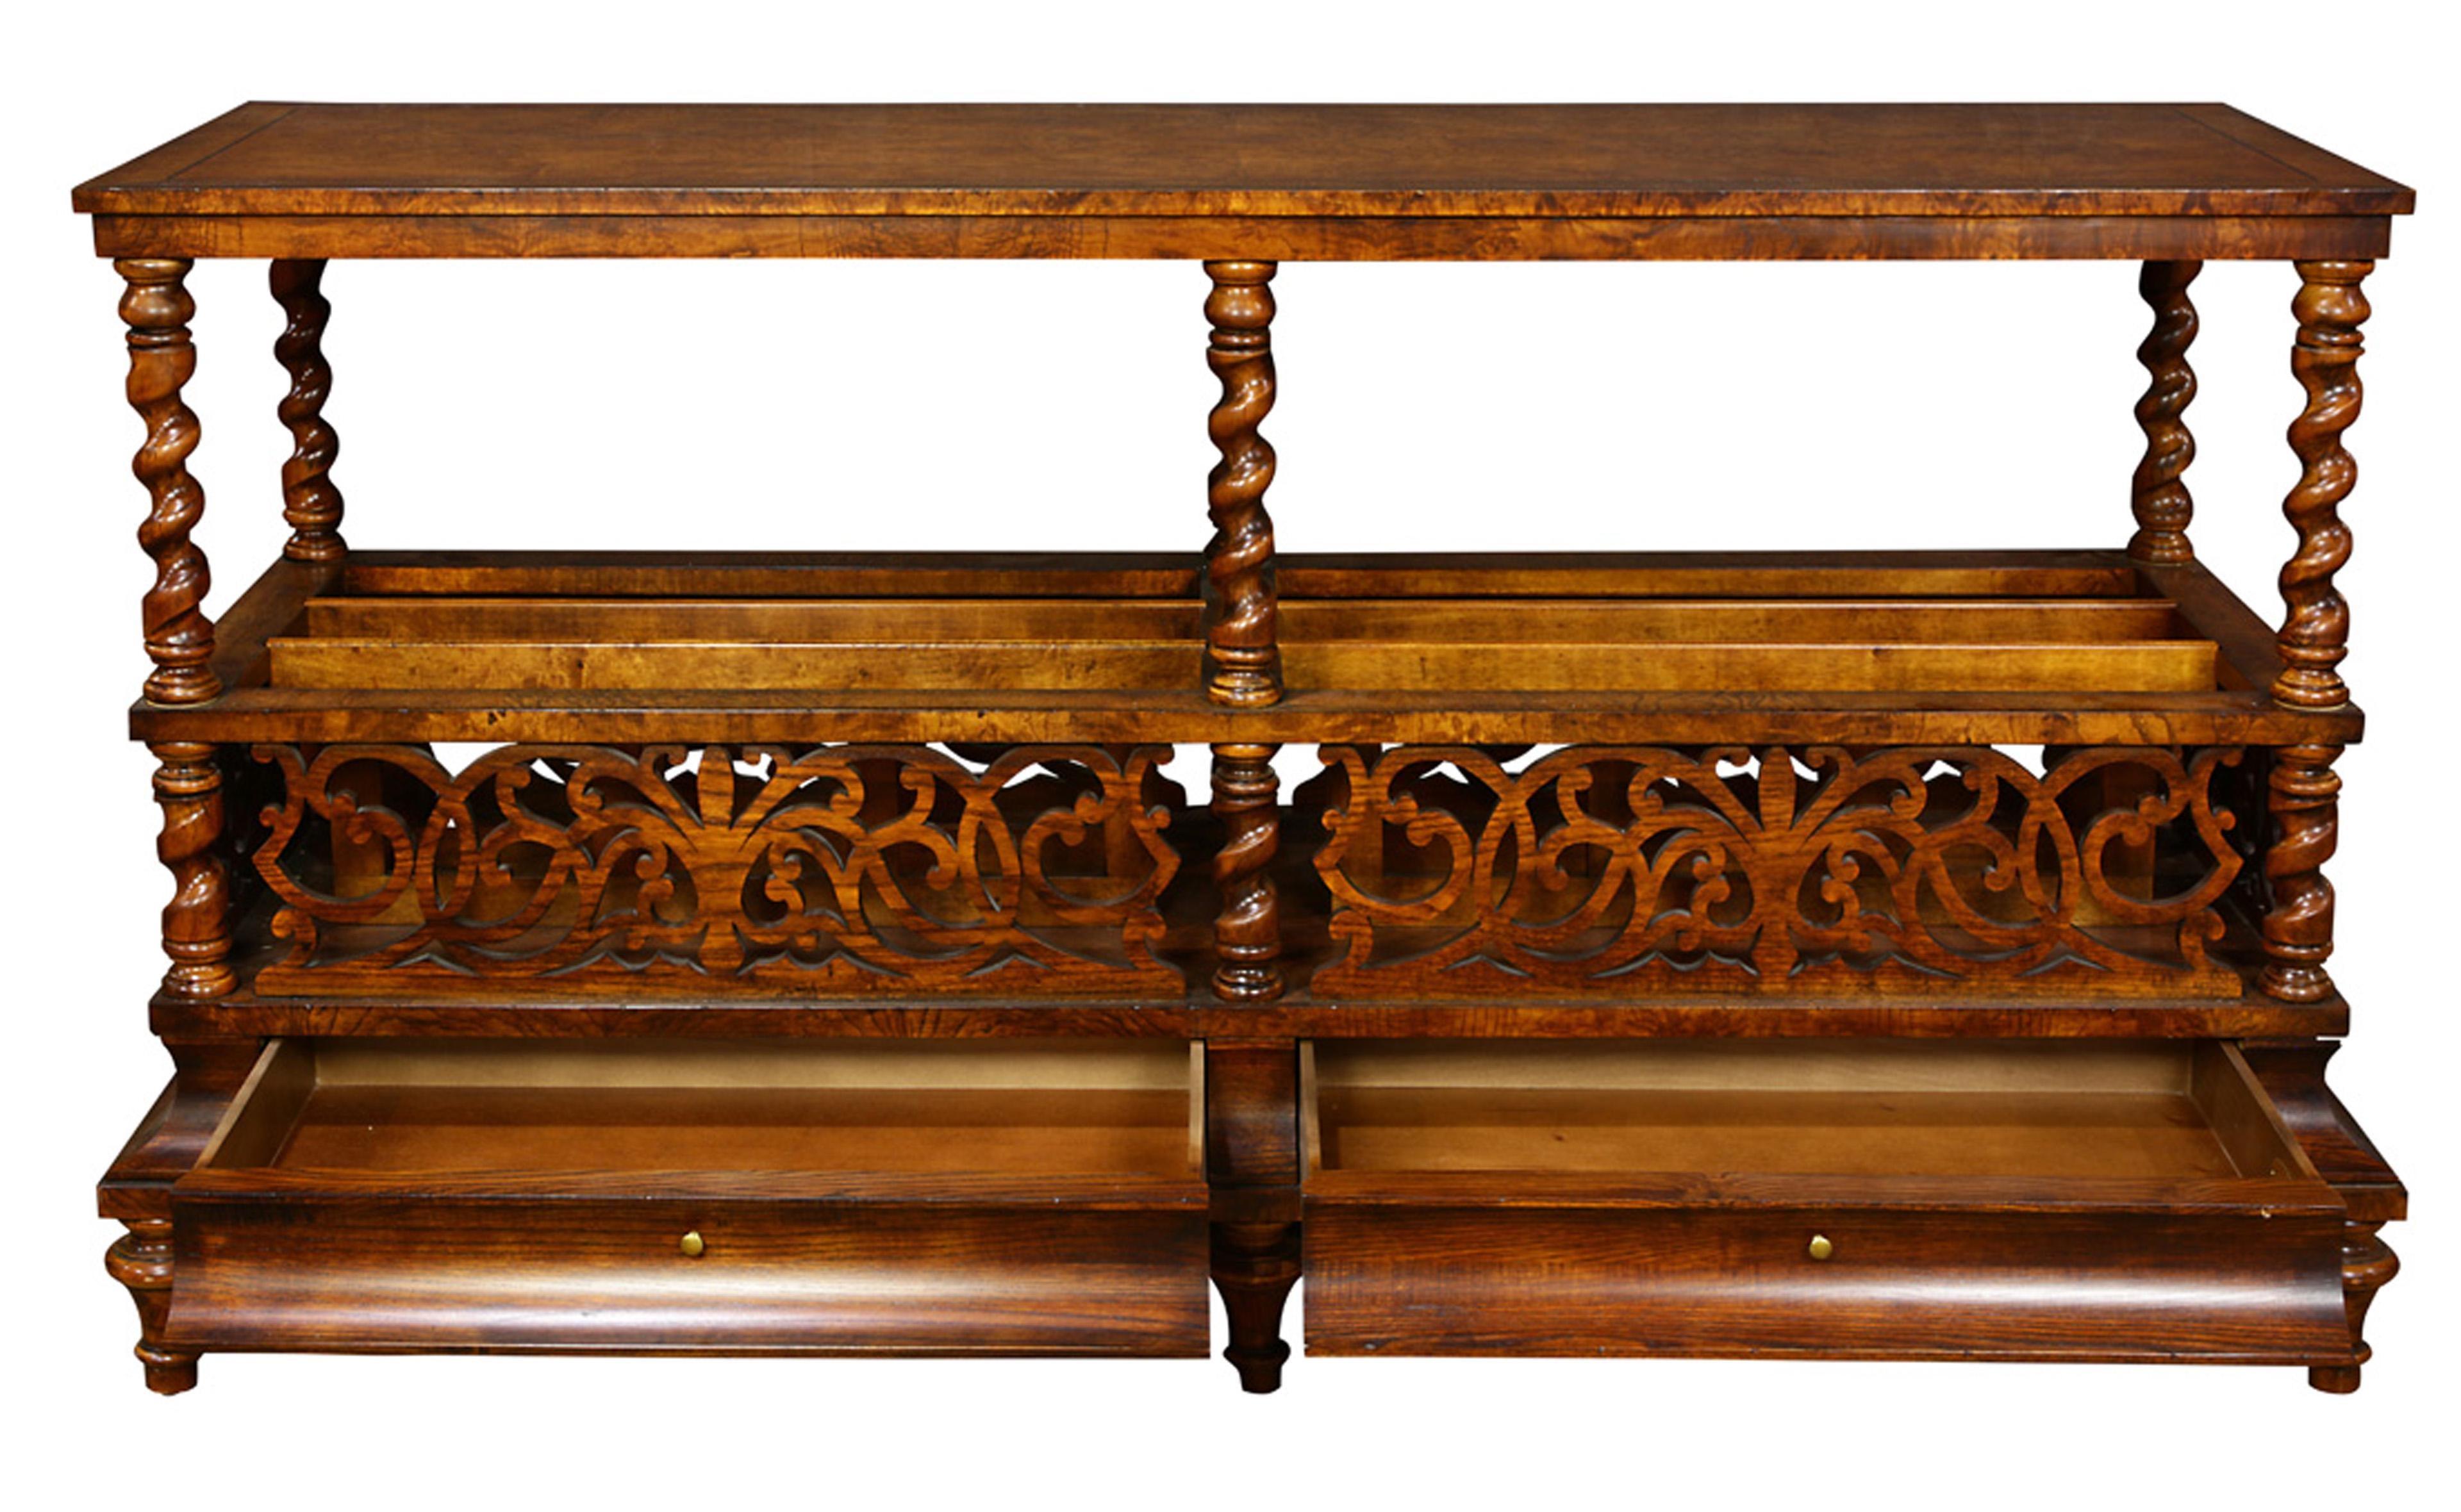 William IV style Henredon Historic Natchez collection console table, circa 1990

Outstanding console table by Henredon

From their Historic 